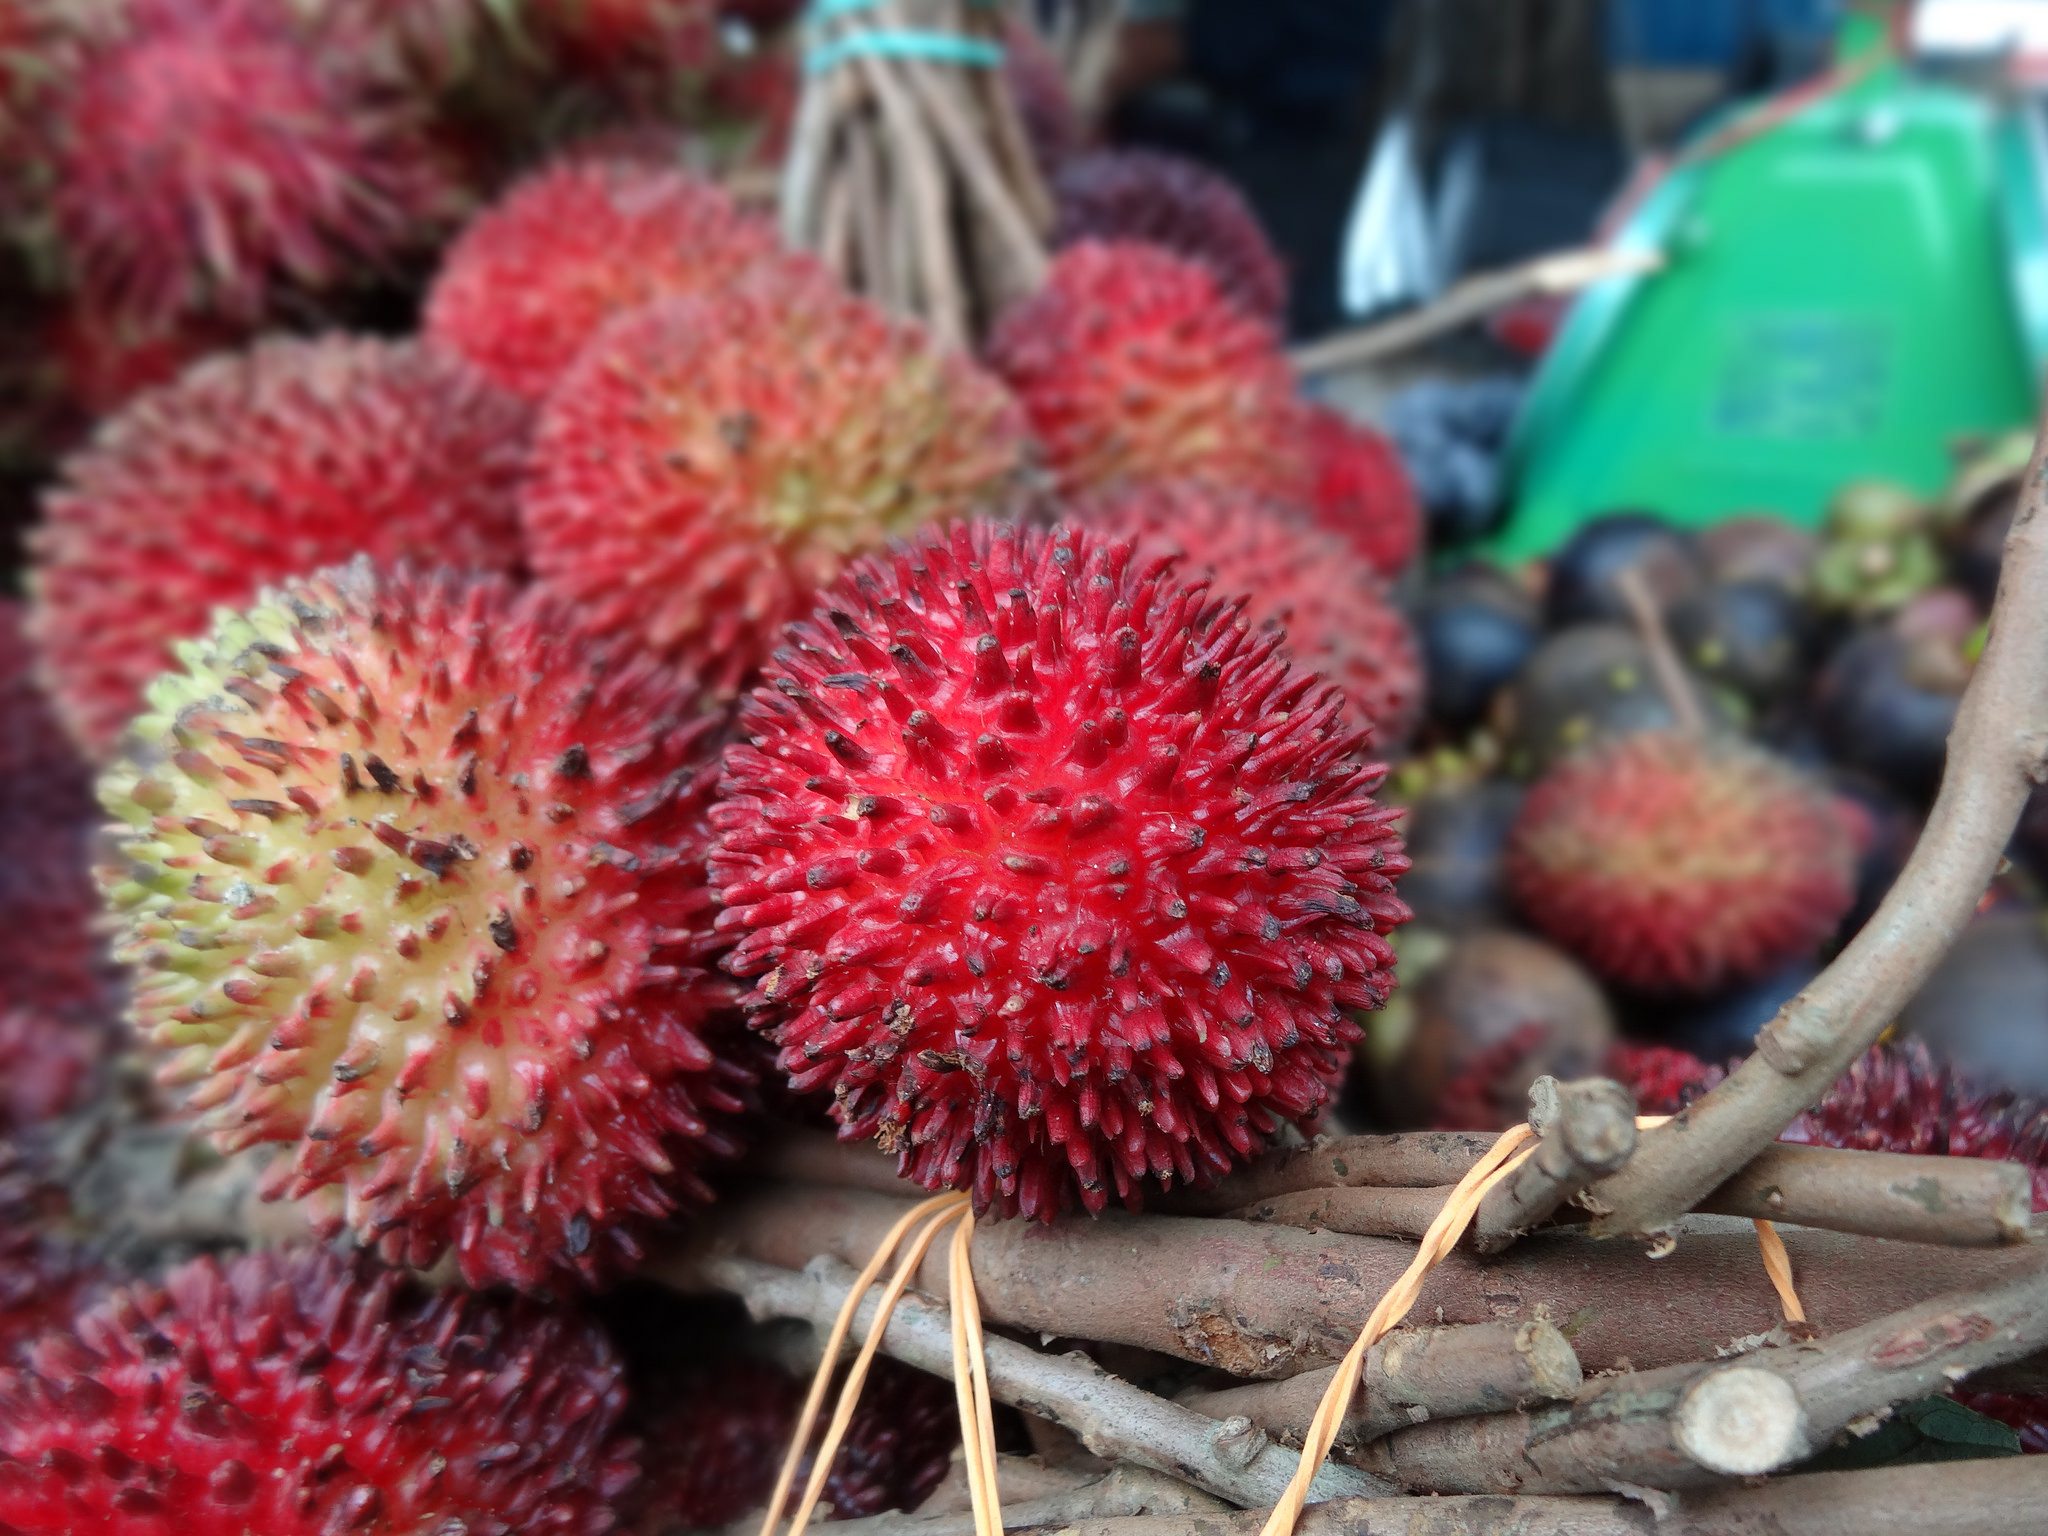 Pulasan. Pic: Jeff and Neda Fields/flickr